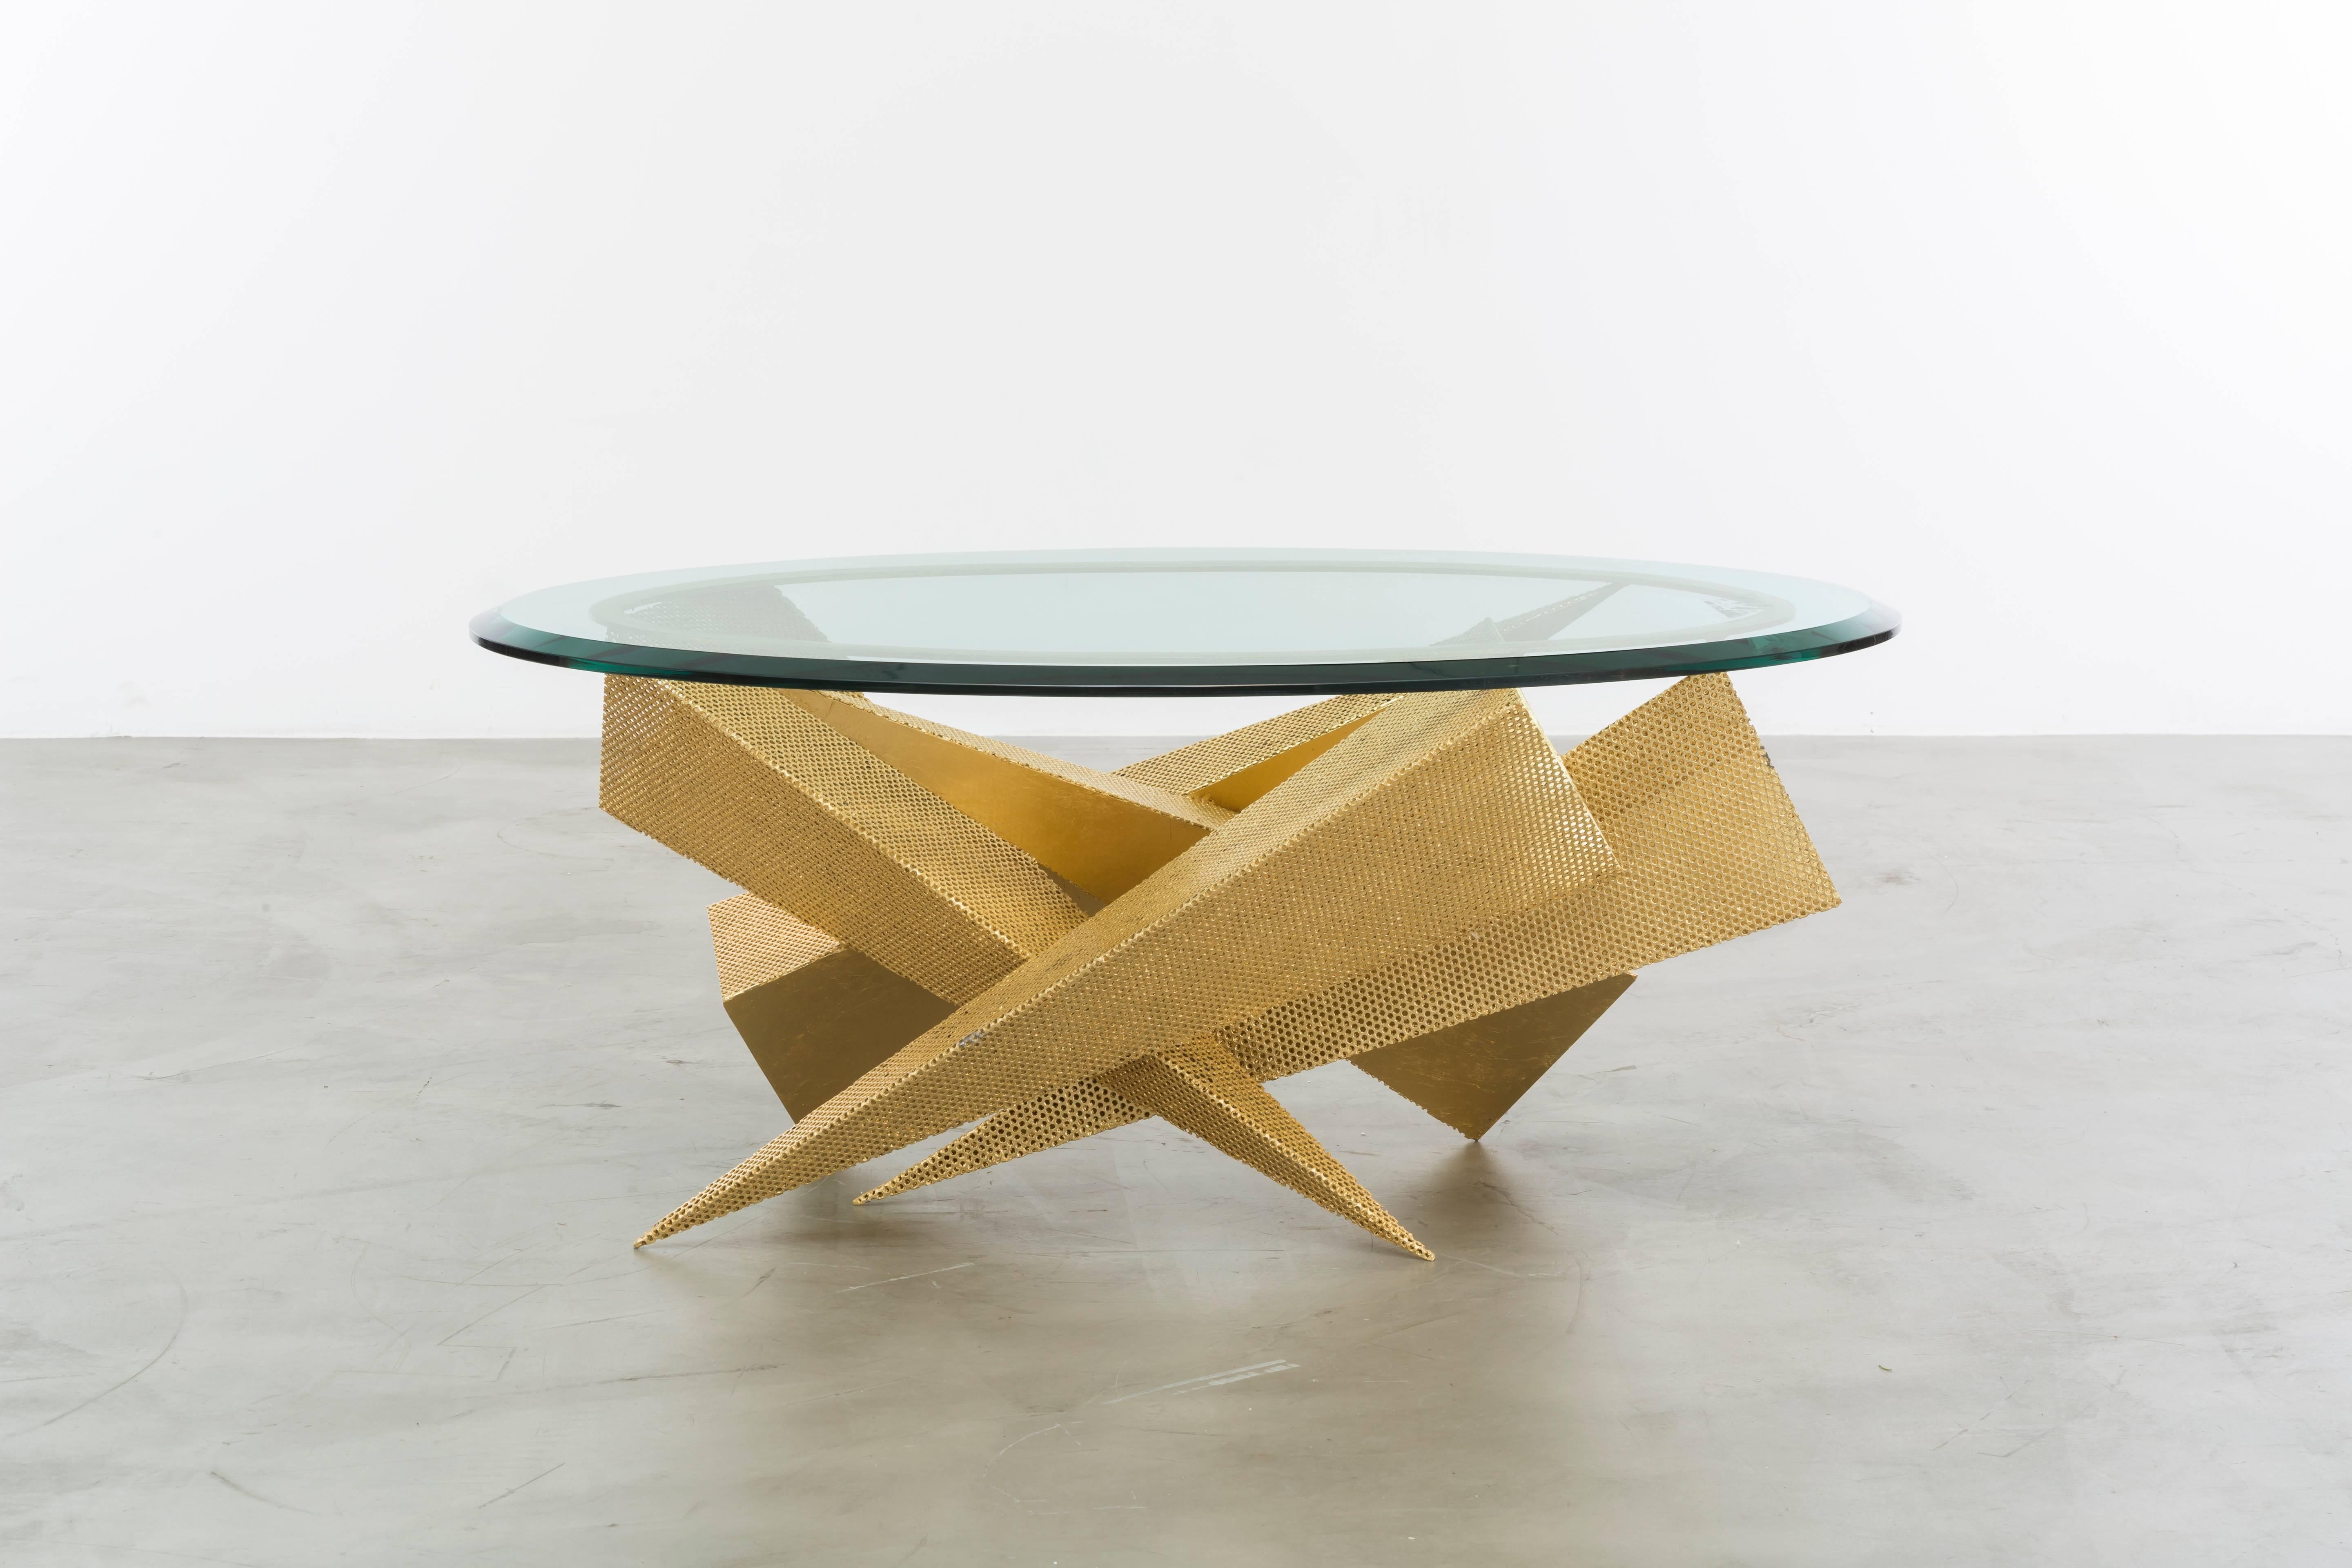 The Trystan coffee table is a modern sculptural gold leaf cocktail table made of gold leaf over perforated iron with beveled edge glass. Fully custom and made to order in California.